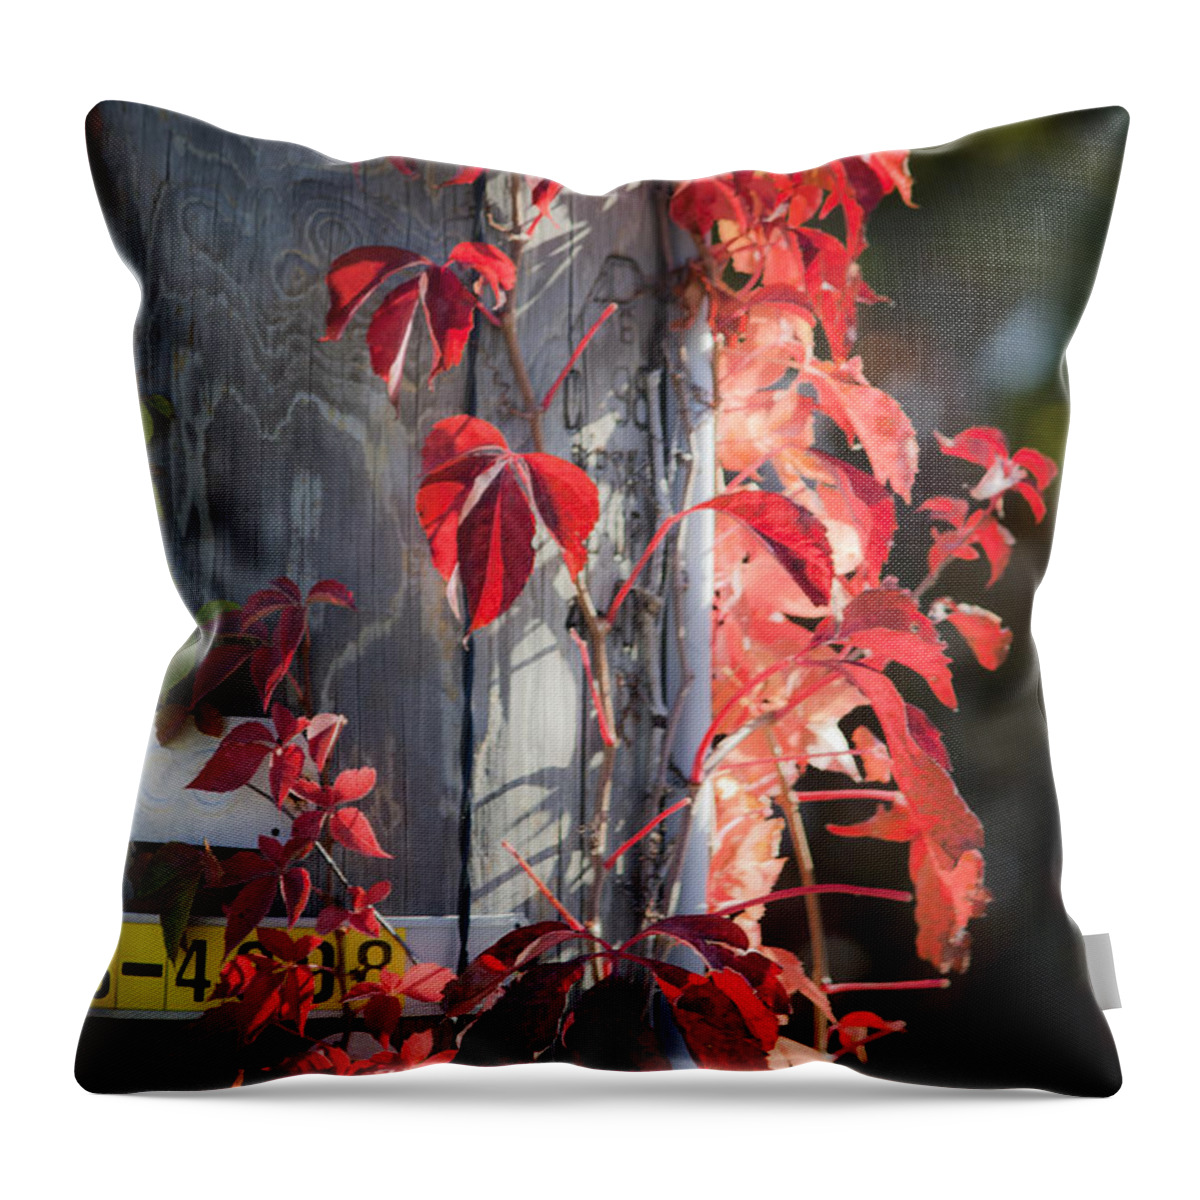 Virginia Creeper Throw Pillow featuring the photograph Dreamy Red Creeper by Teresa Mucha